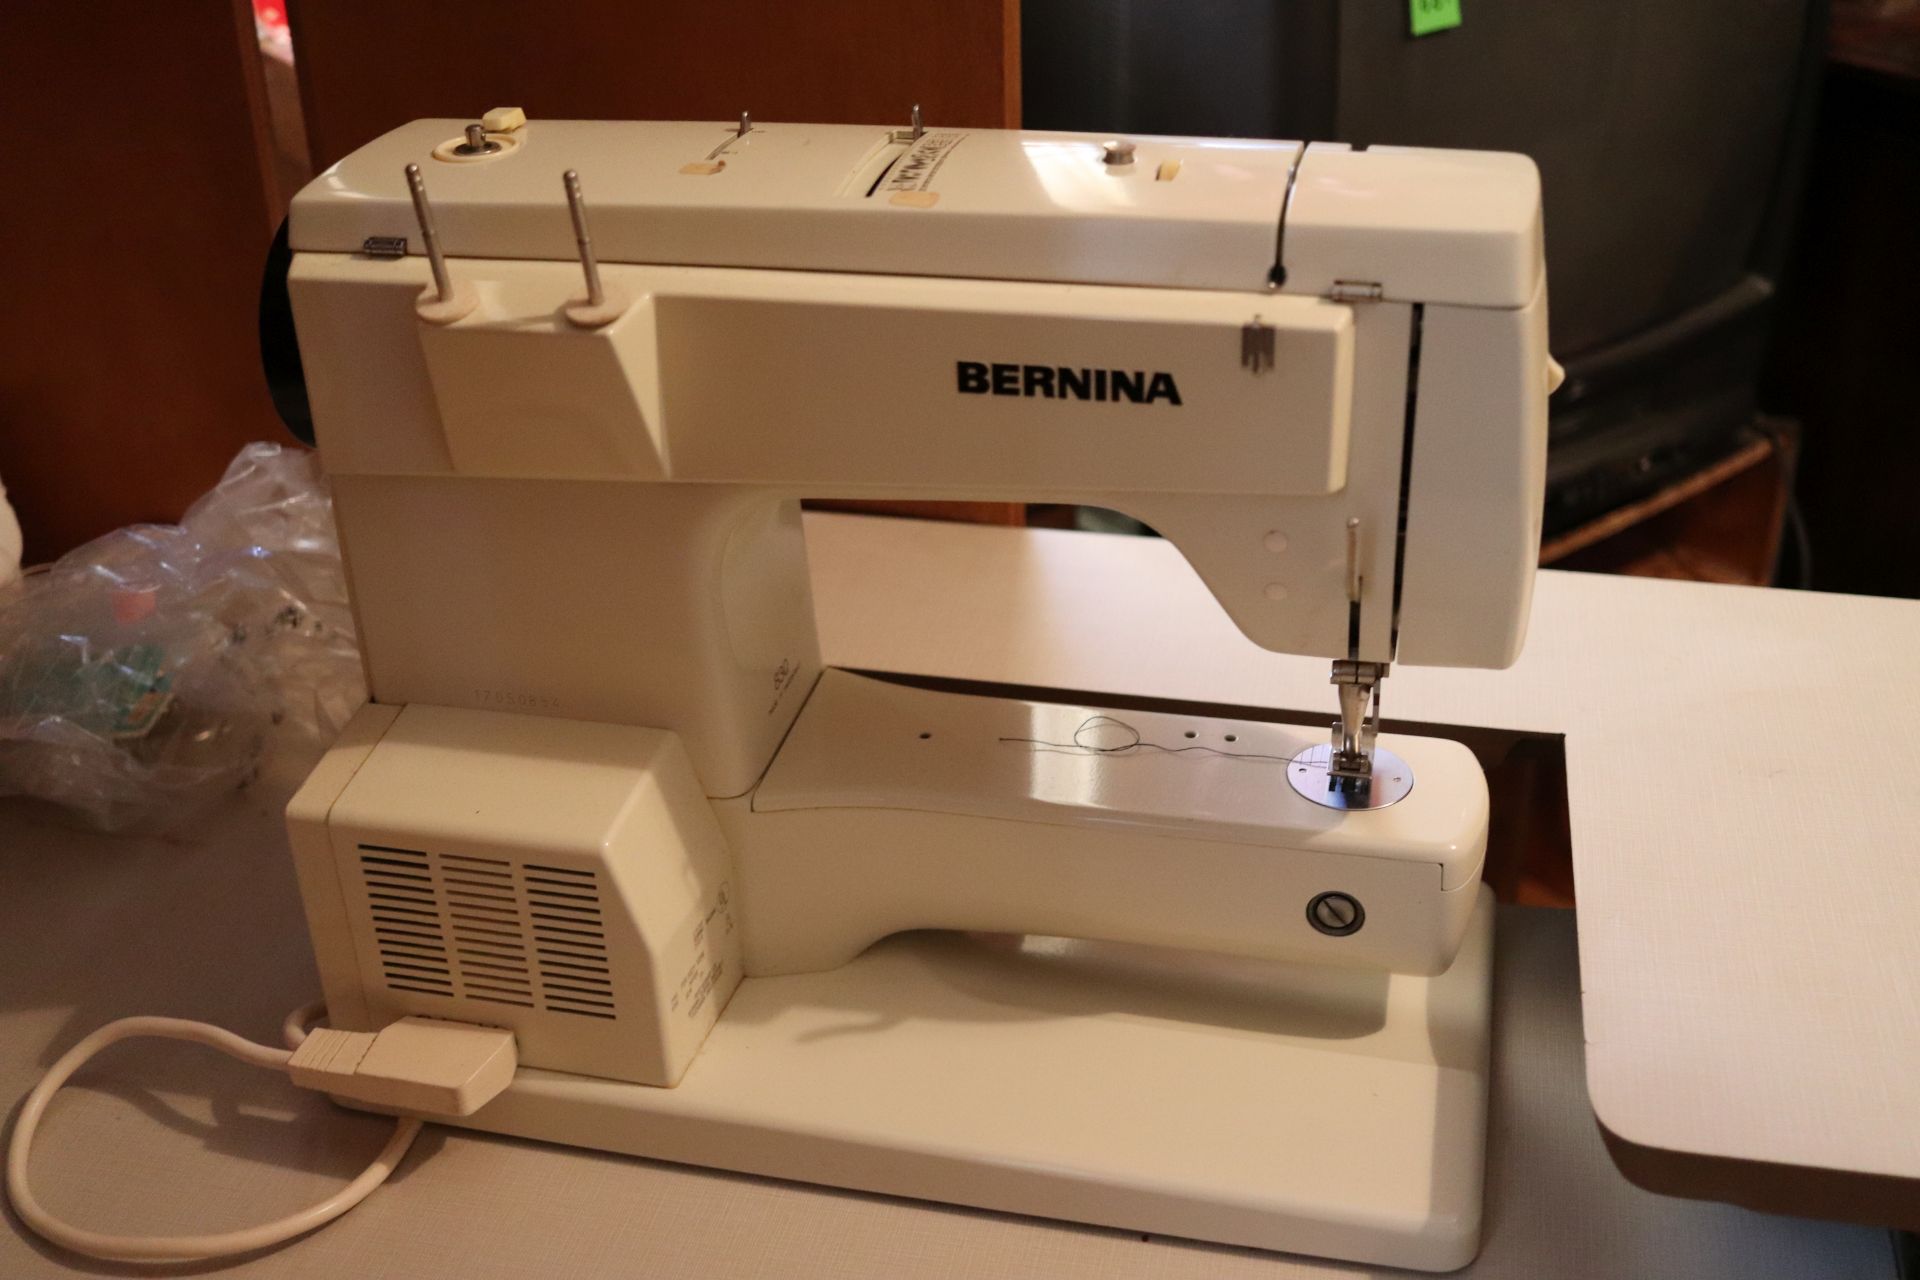 Bernina sewing machine, model 830, with hideaway cabinet and sewing supplies - Image 2 of 5